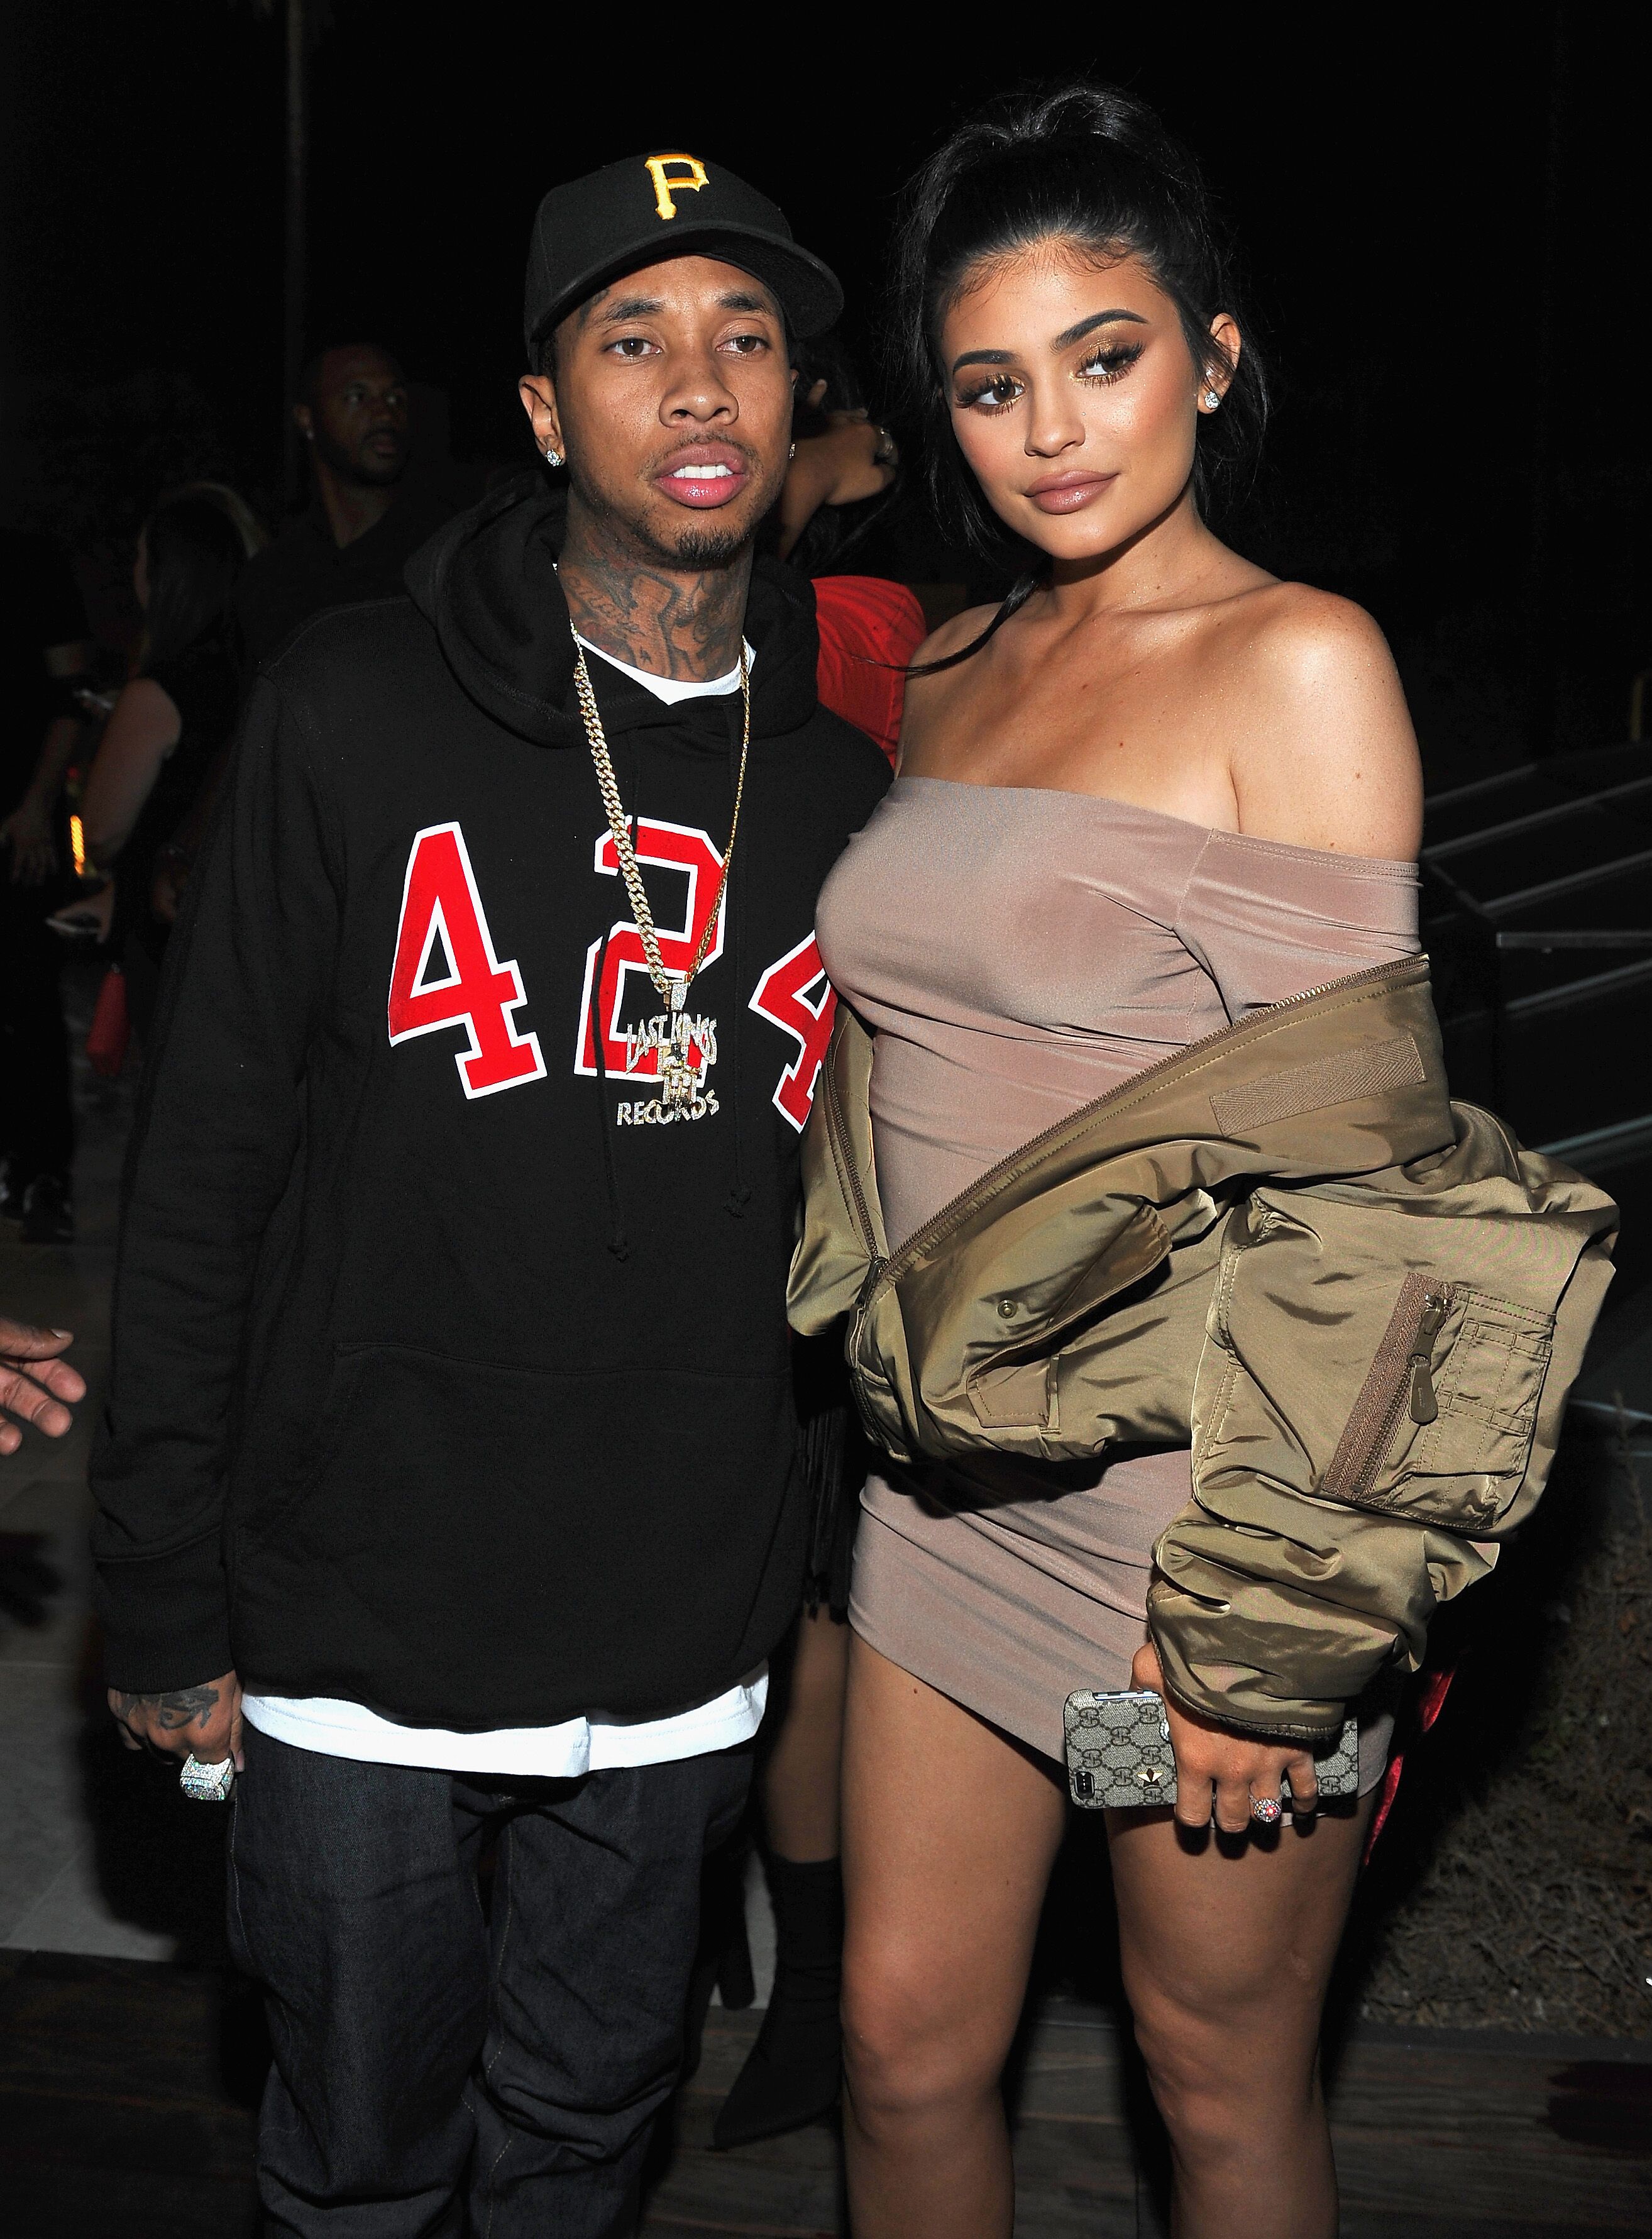 Tyga and Kylie Jenner stepping out for an event together | Source: Getty Images/GlobalImagesUkraine